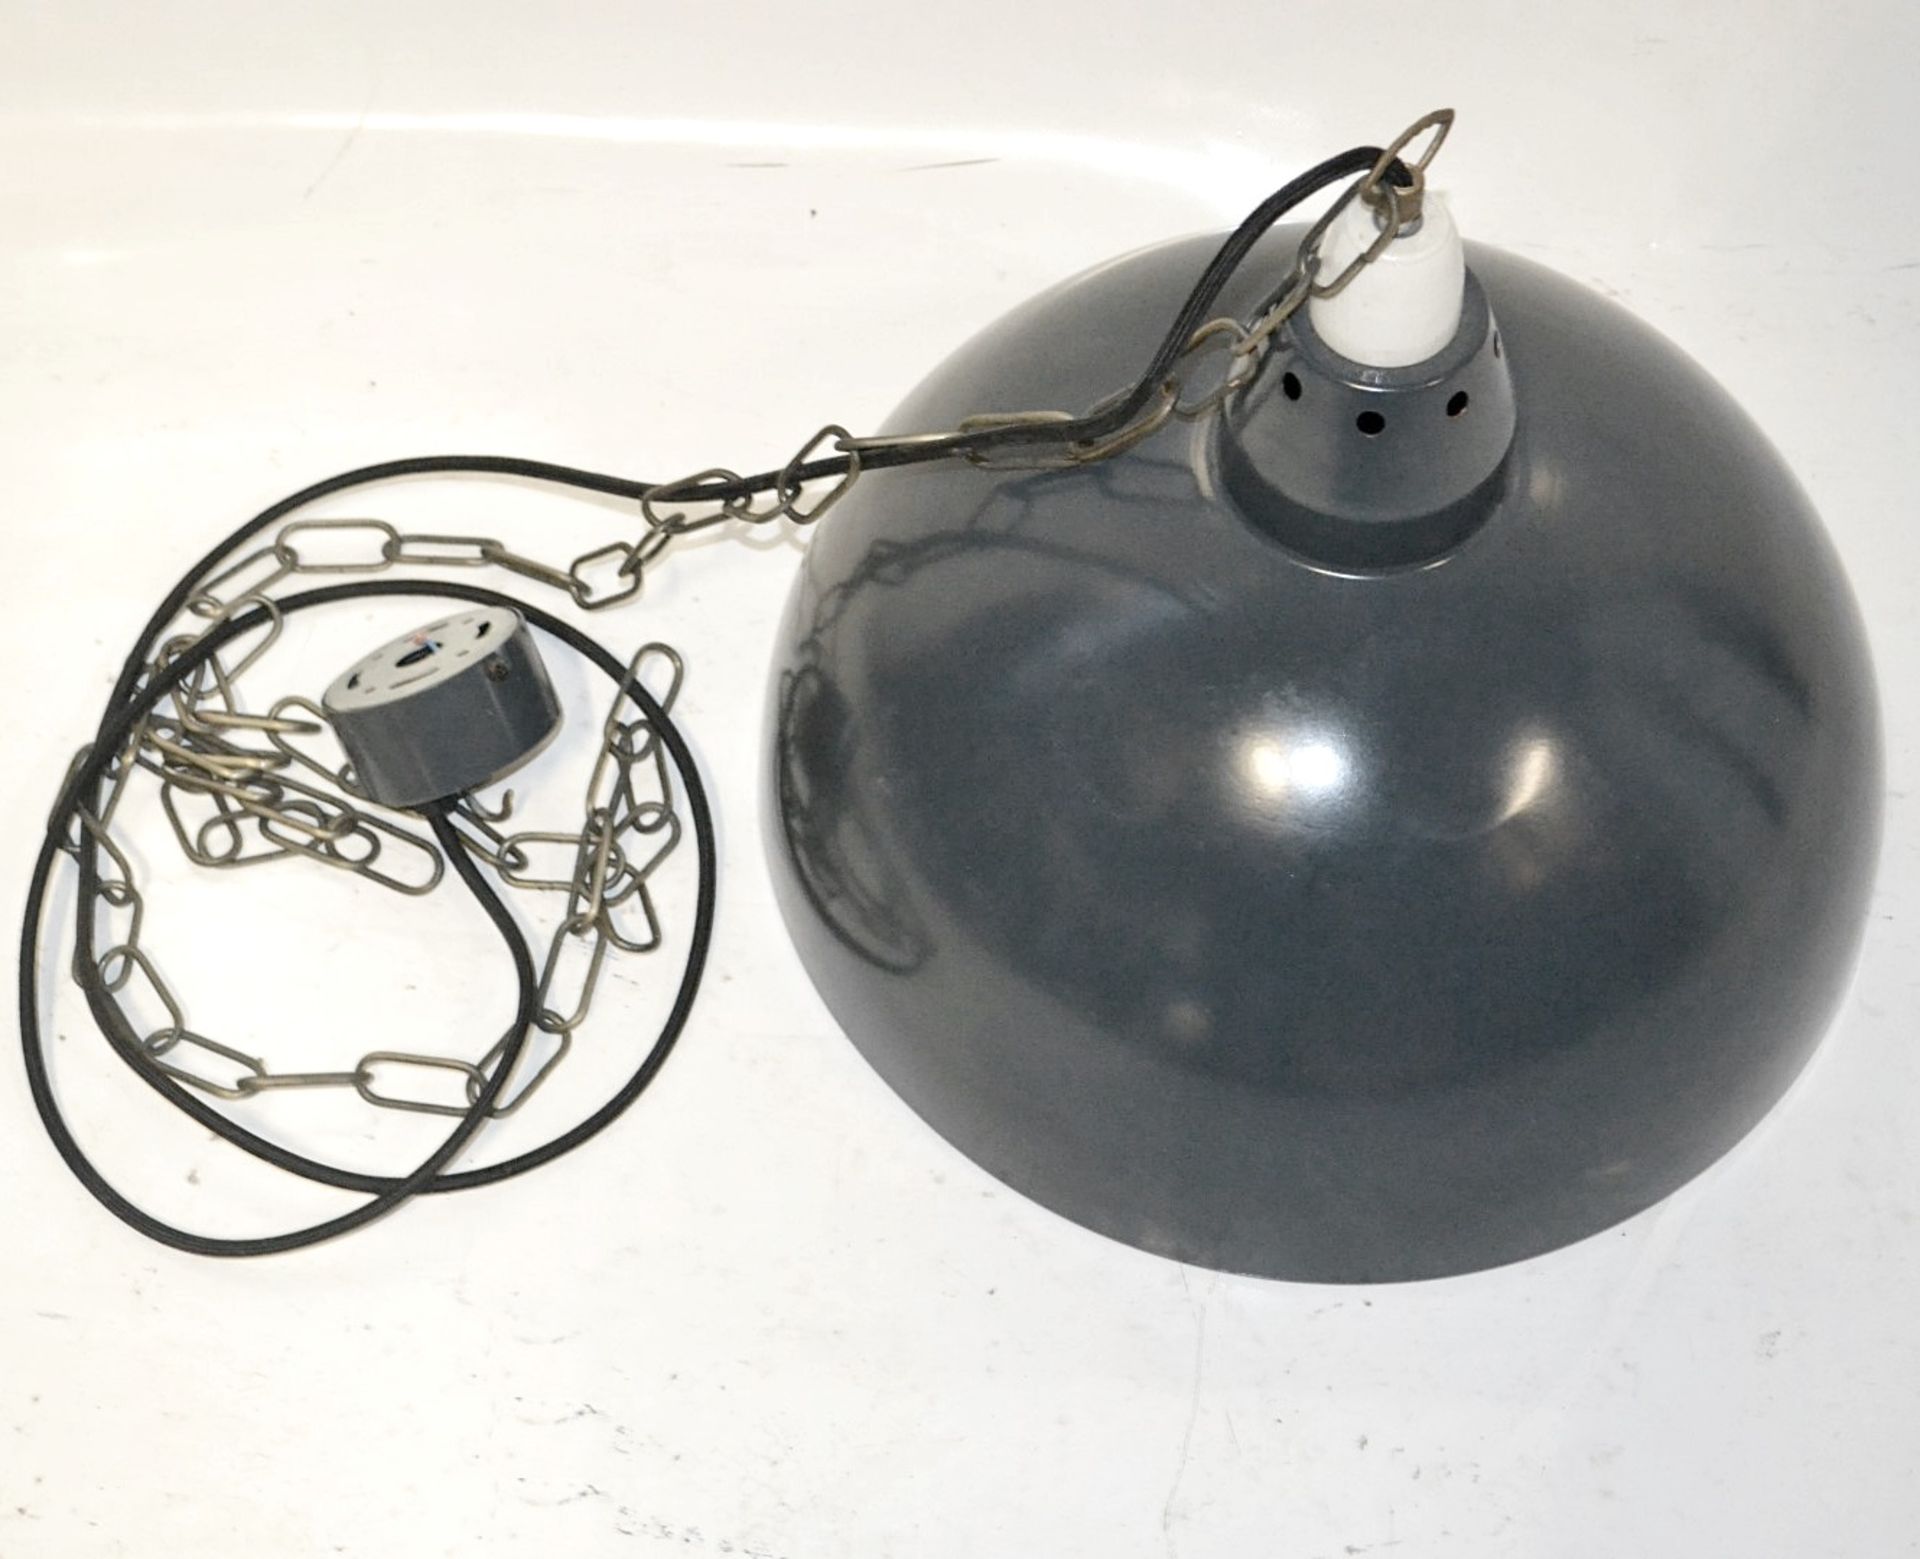 2 x Dome Pendant Ceiling Light Fittings With Chain And Black Fabric Flex - CL353 - Image 4 of 6